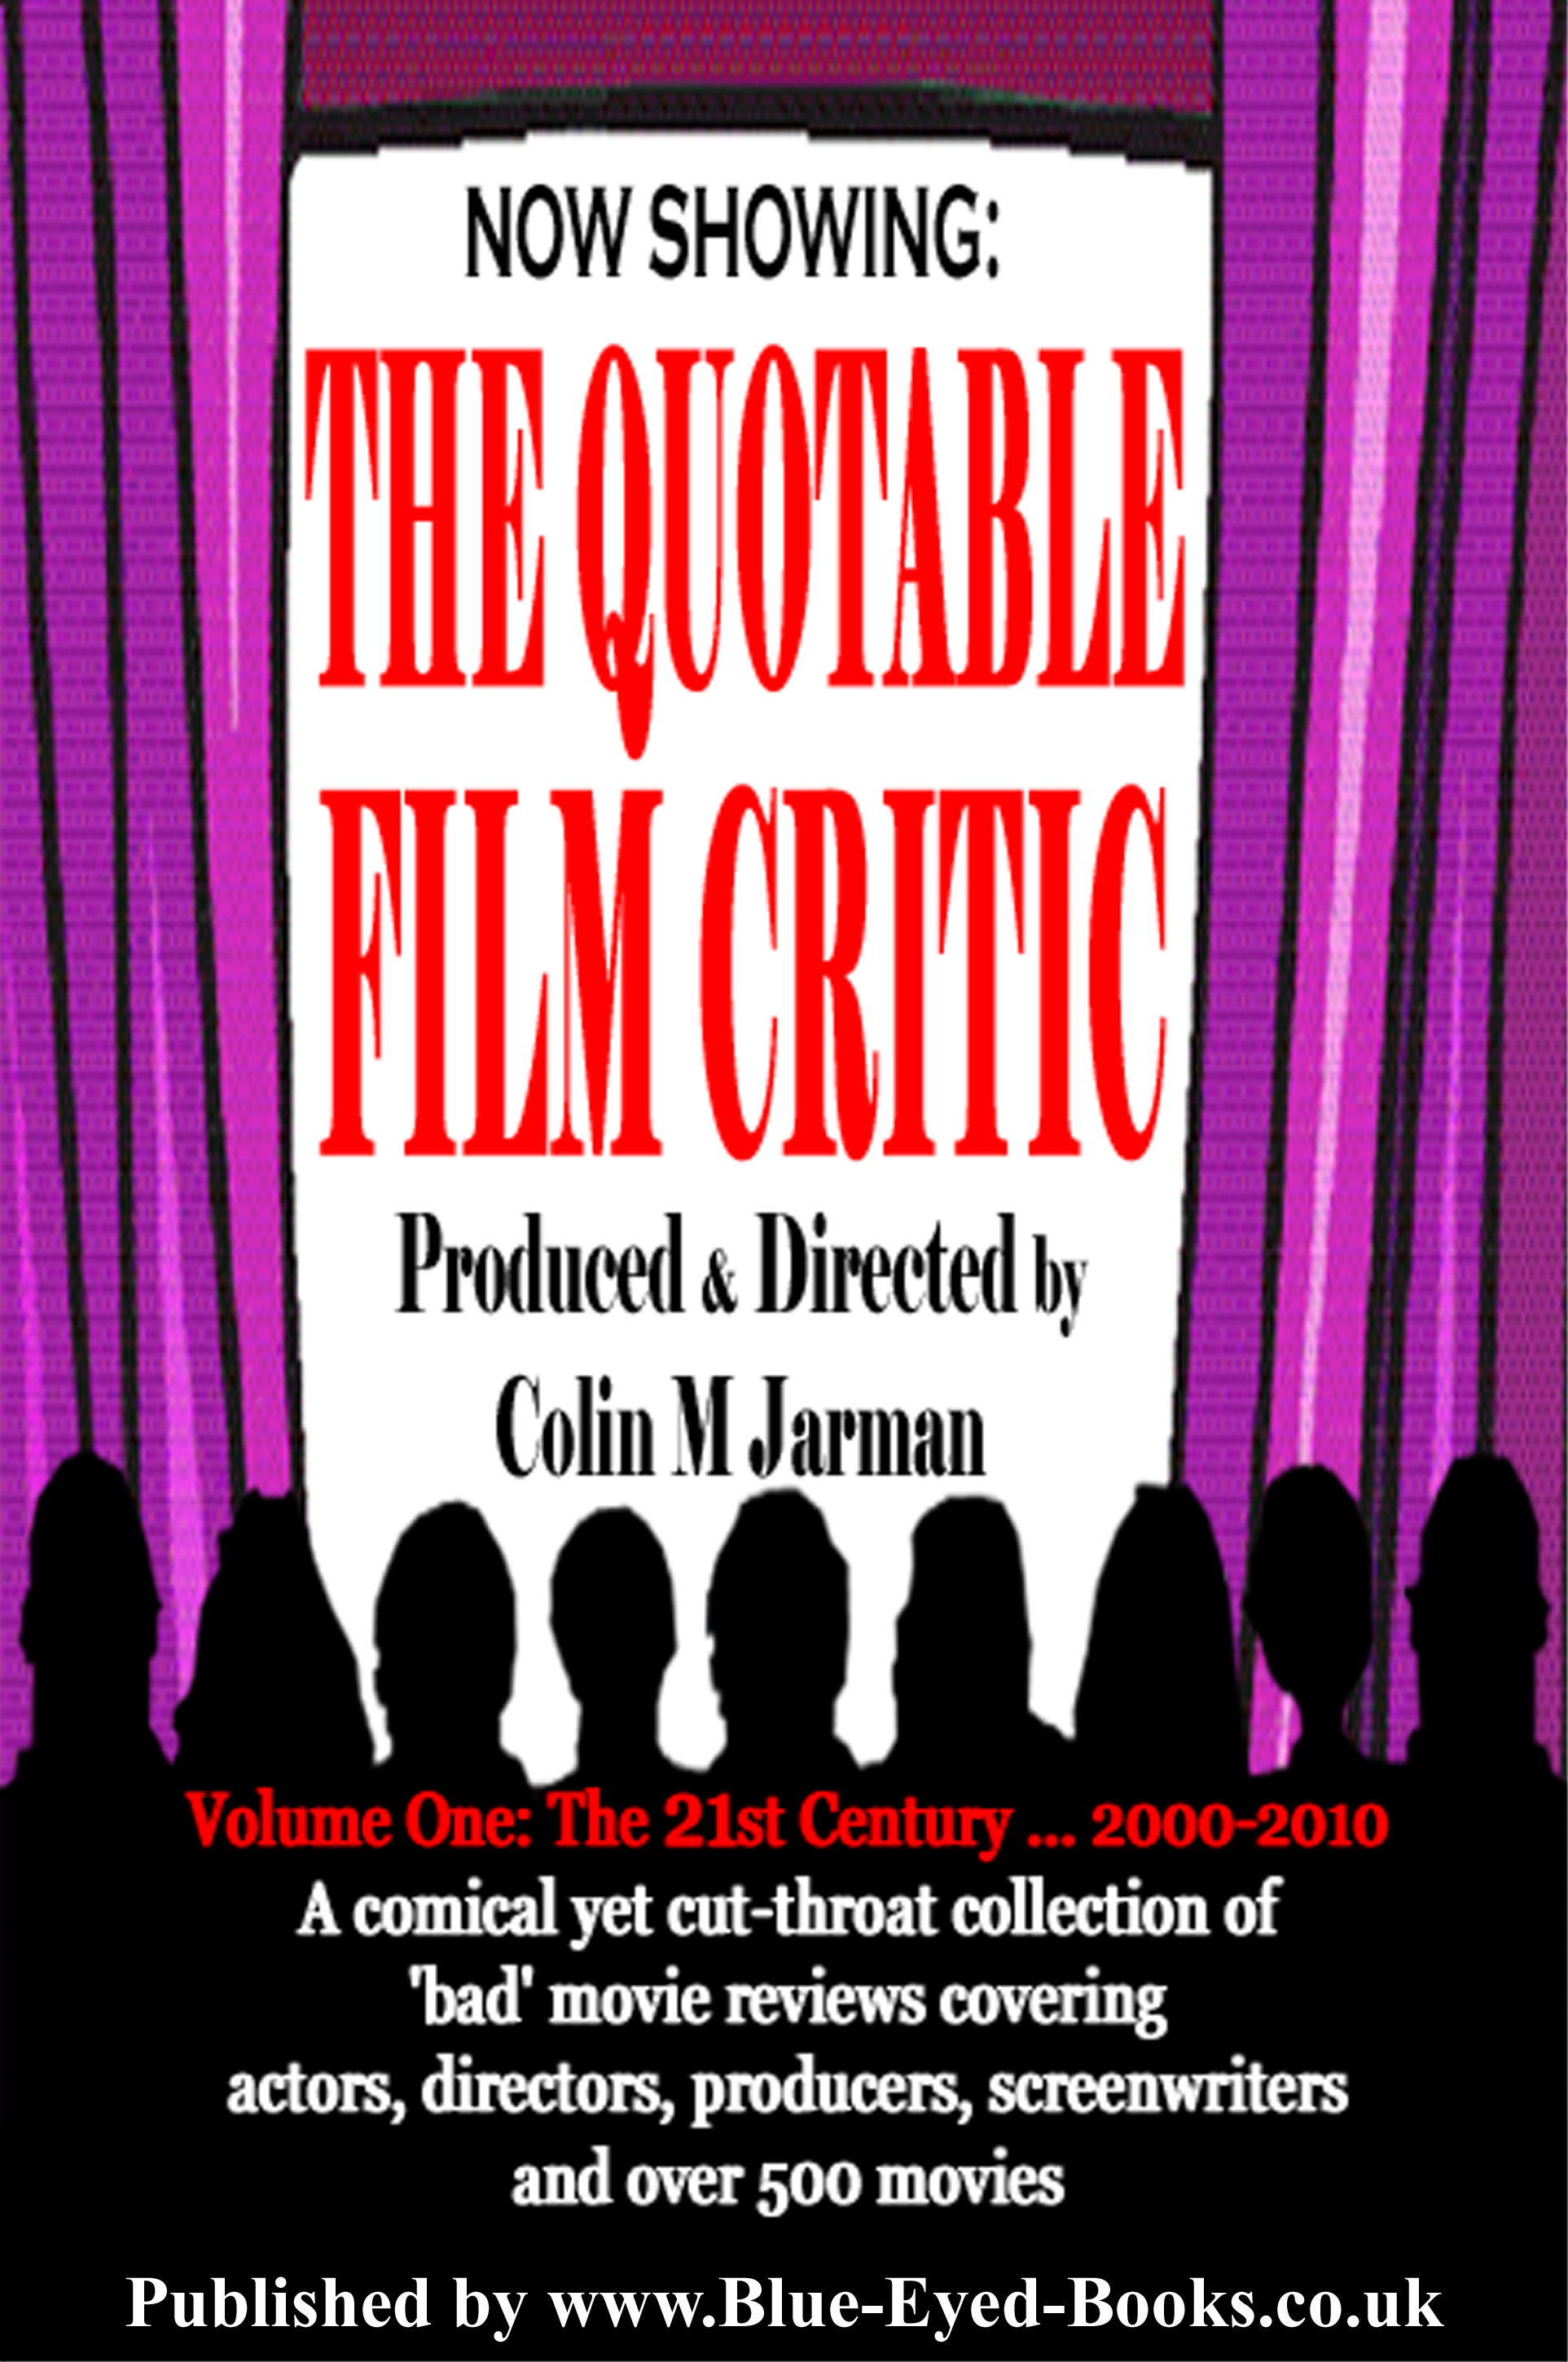 The Quotable Film Critic - Bad Movie Reviews Vol One 2000-2010